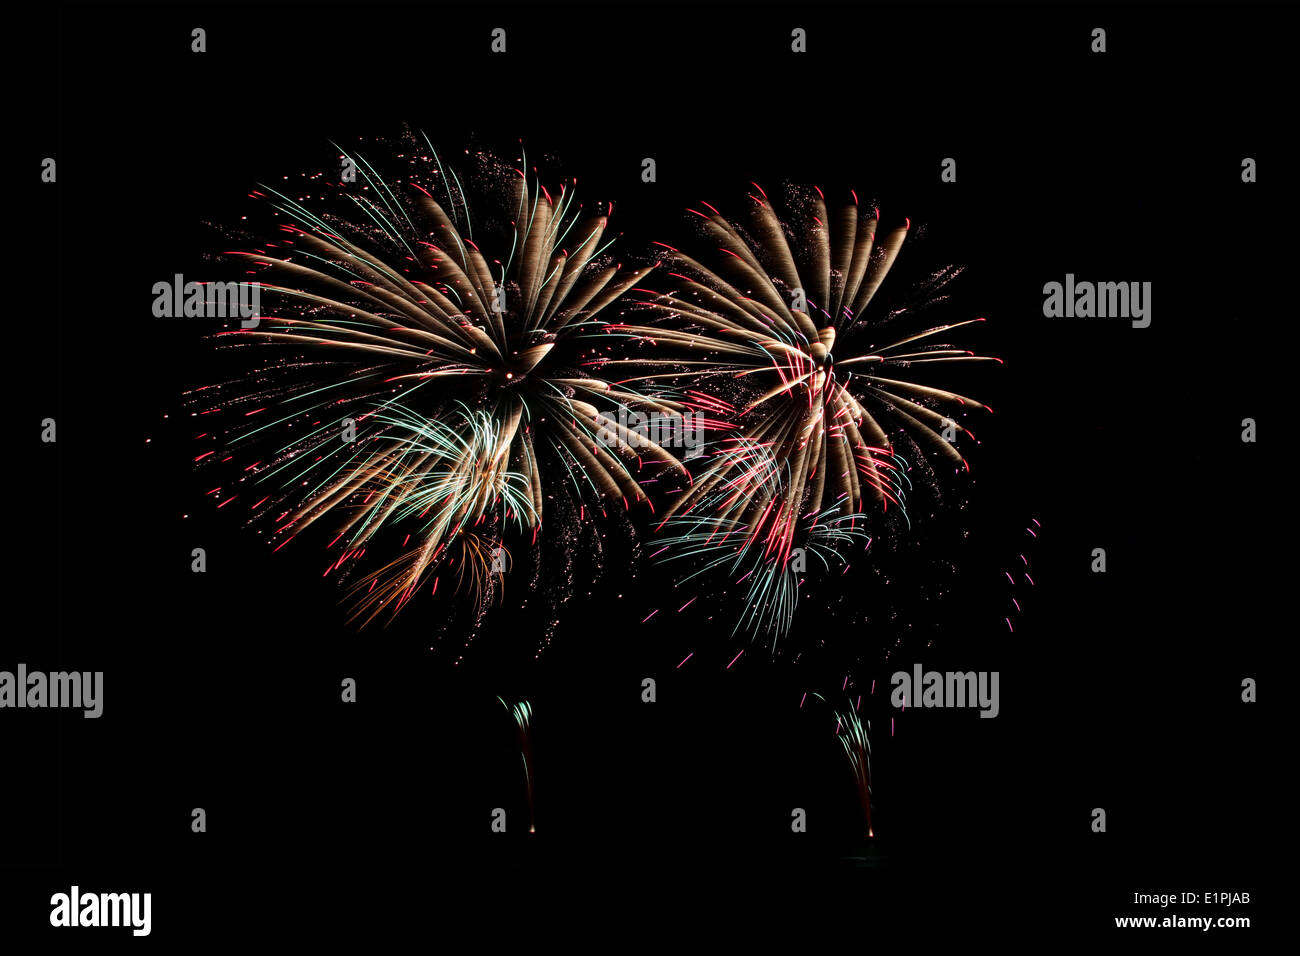 fireworks or firecracker of colorful brightly the night sky. Stock Photo